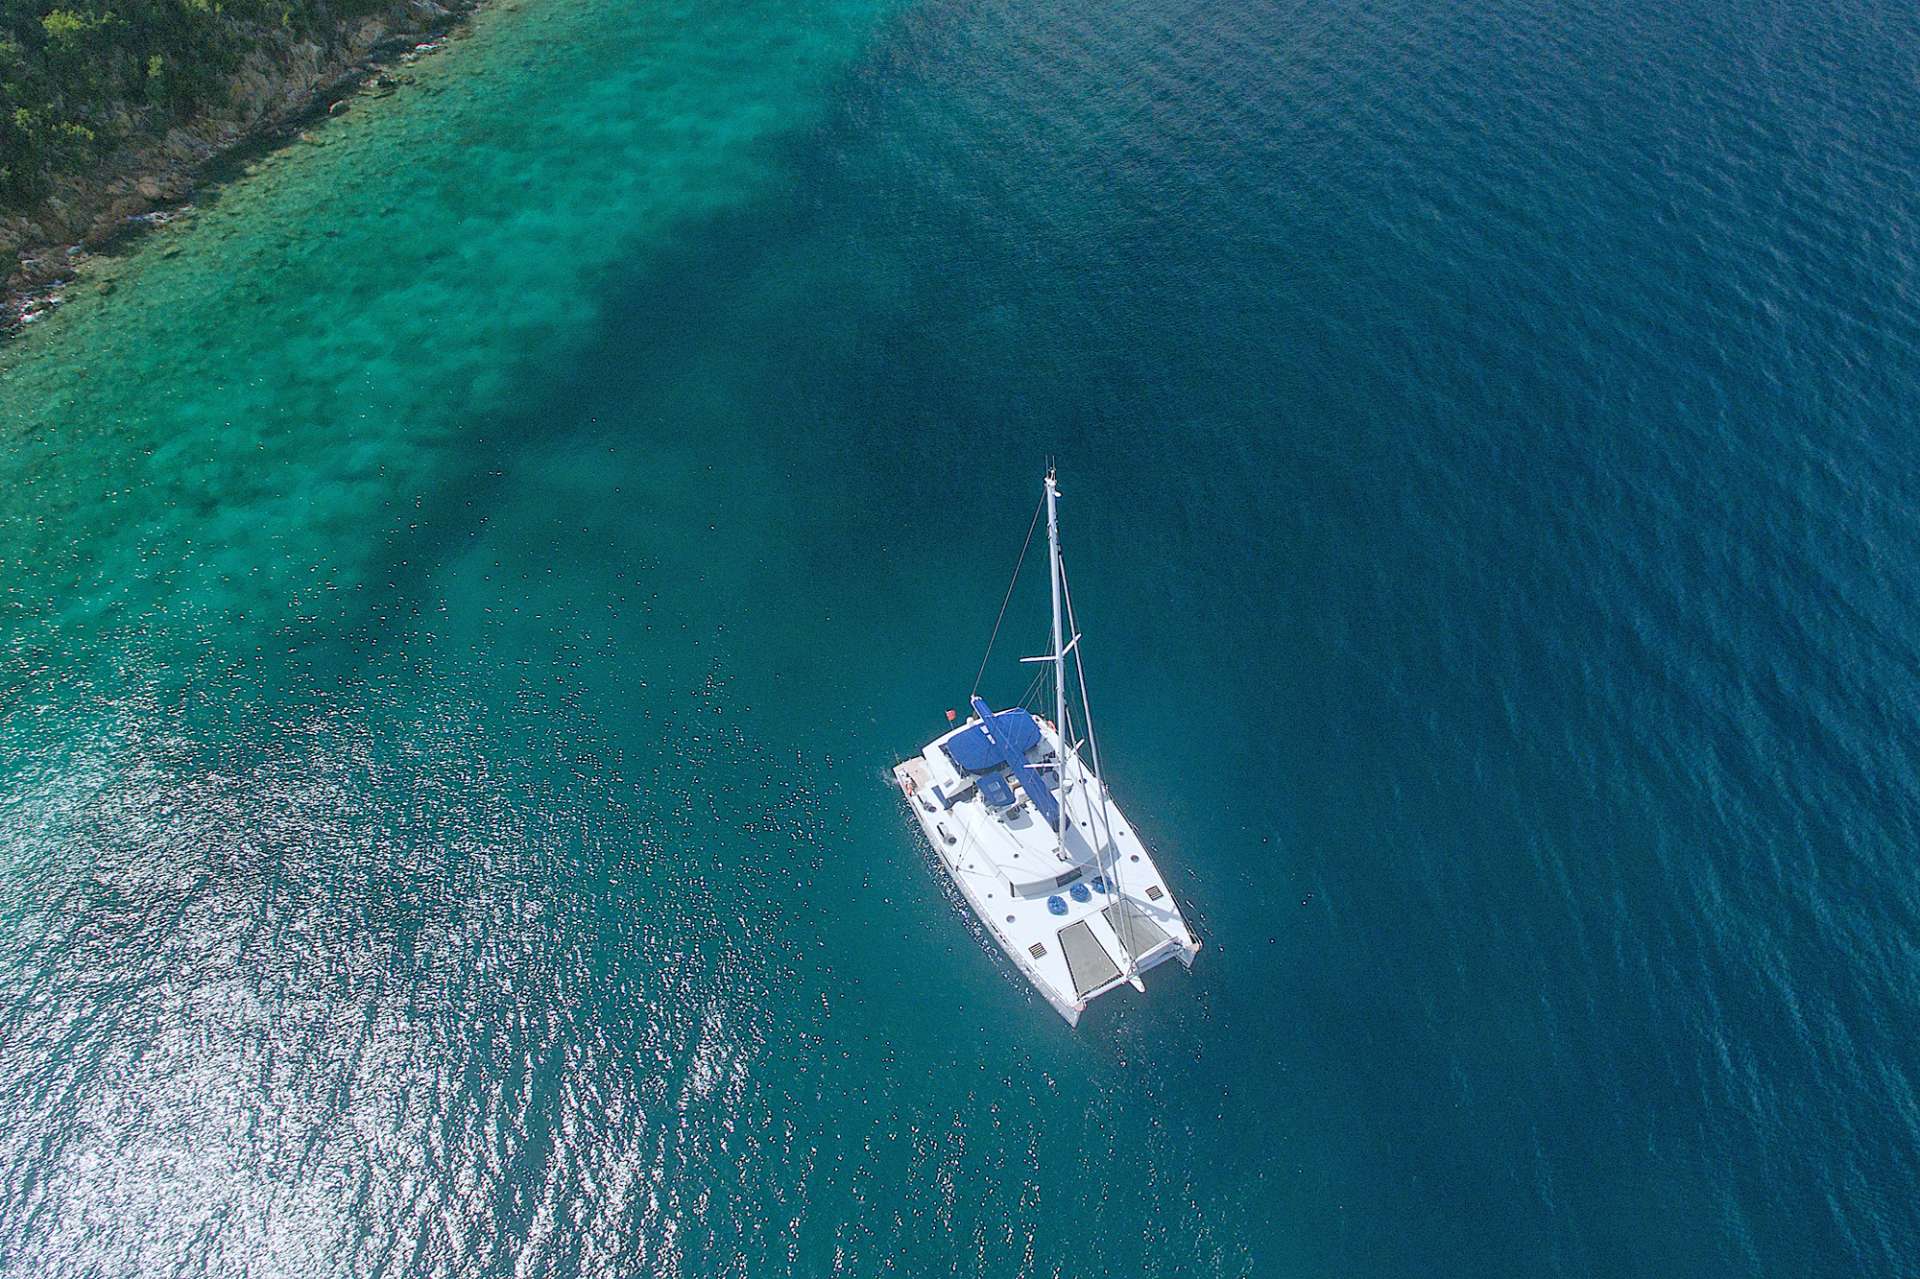 Catamaran Yacht 'NENNE' End of a Perfect Day on Nenne!, 10 PAX, 3 Crew, 67.00 Ft, 20.00 Meters, Built 2017, Fountaine-Pajot, Refit Year The latest, 2020 electronics and equipment onboard. New larger tender June 2019